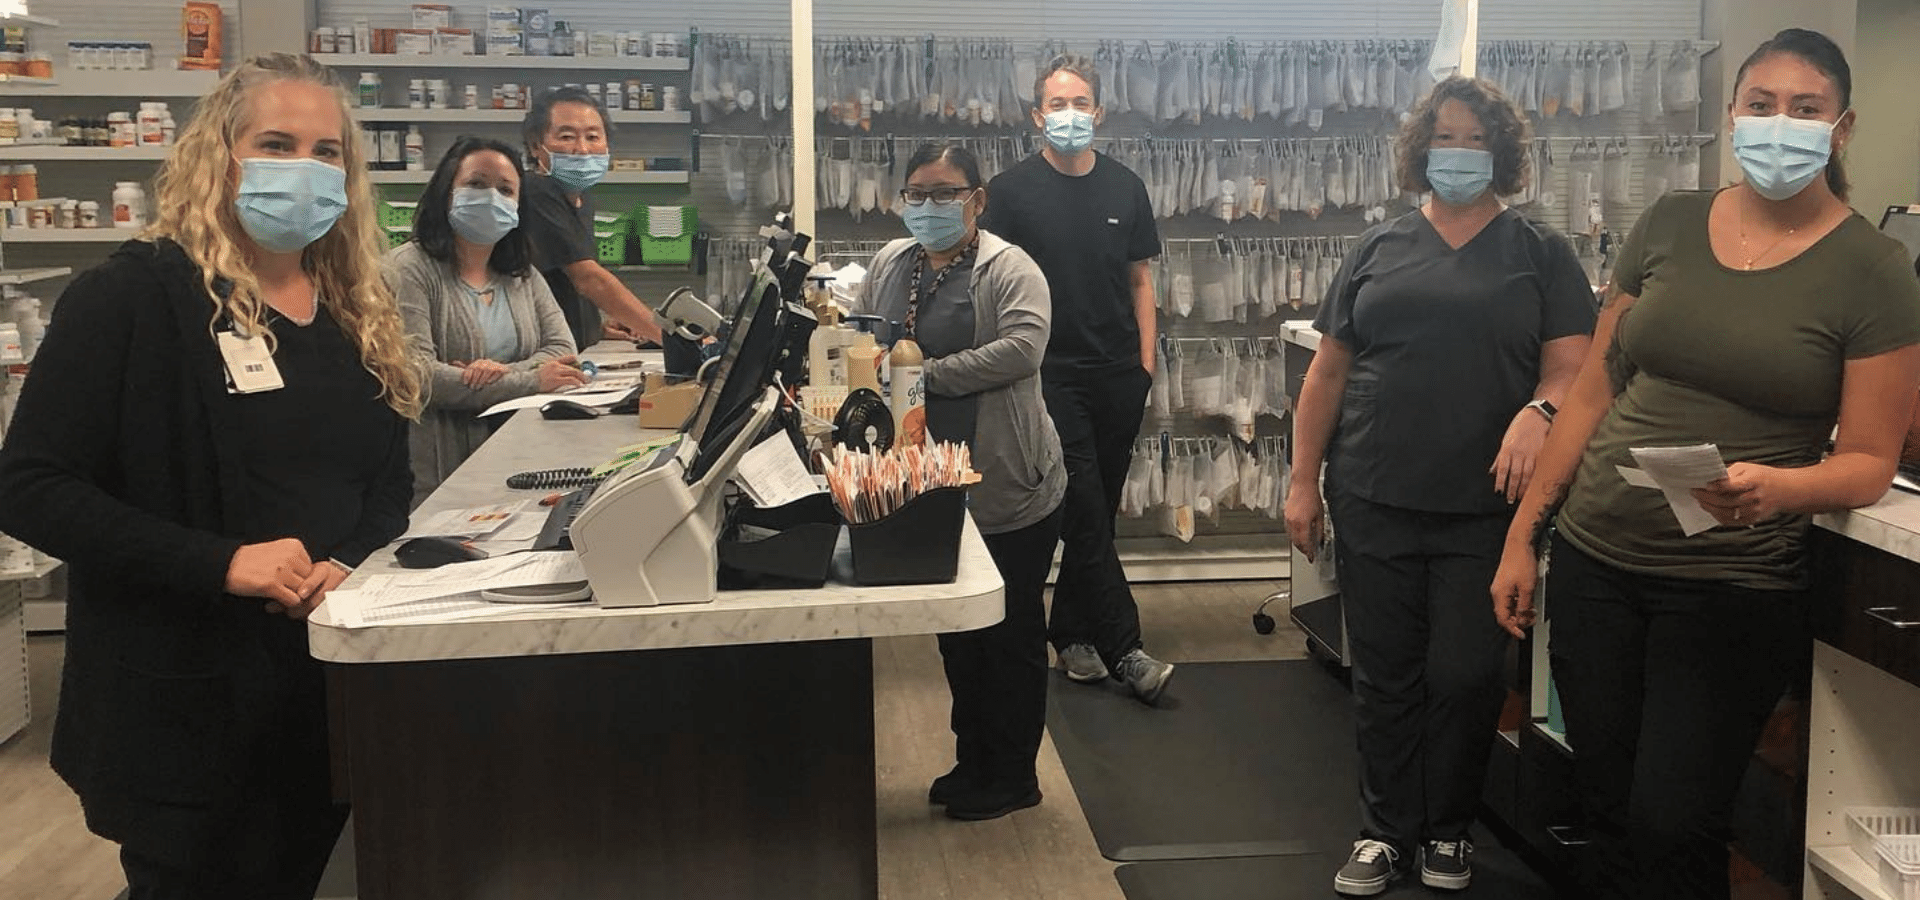 Staff in pharmacy setting with masks.